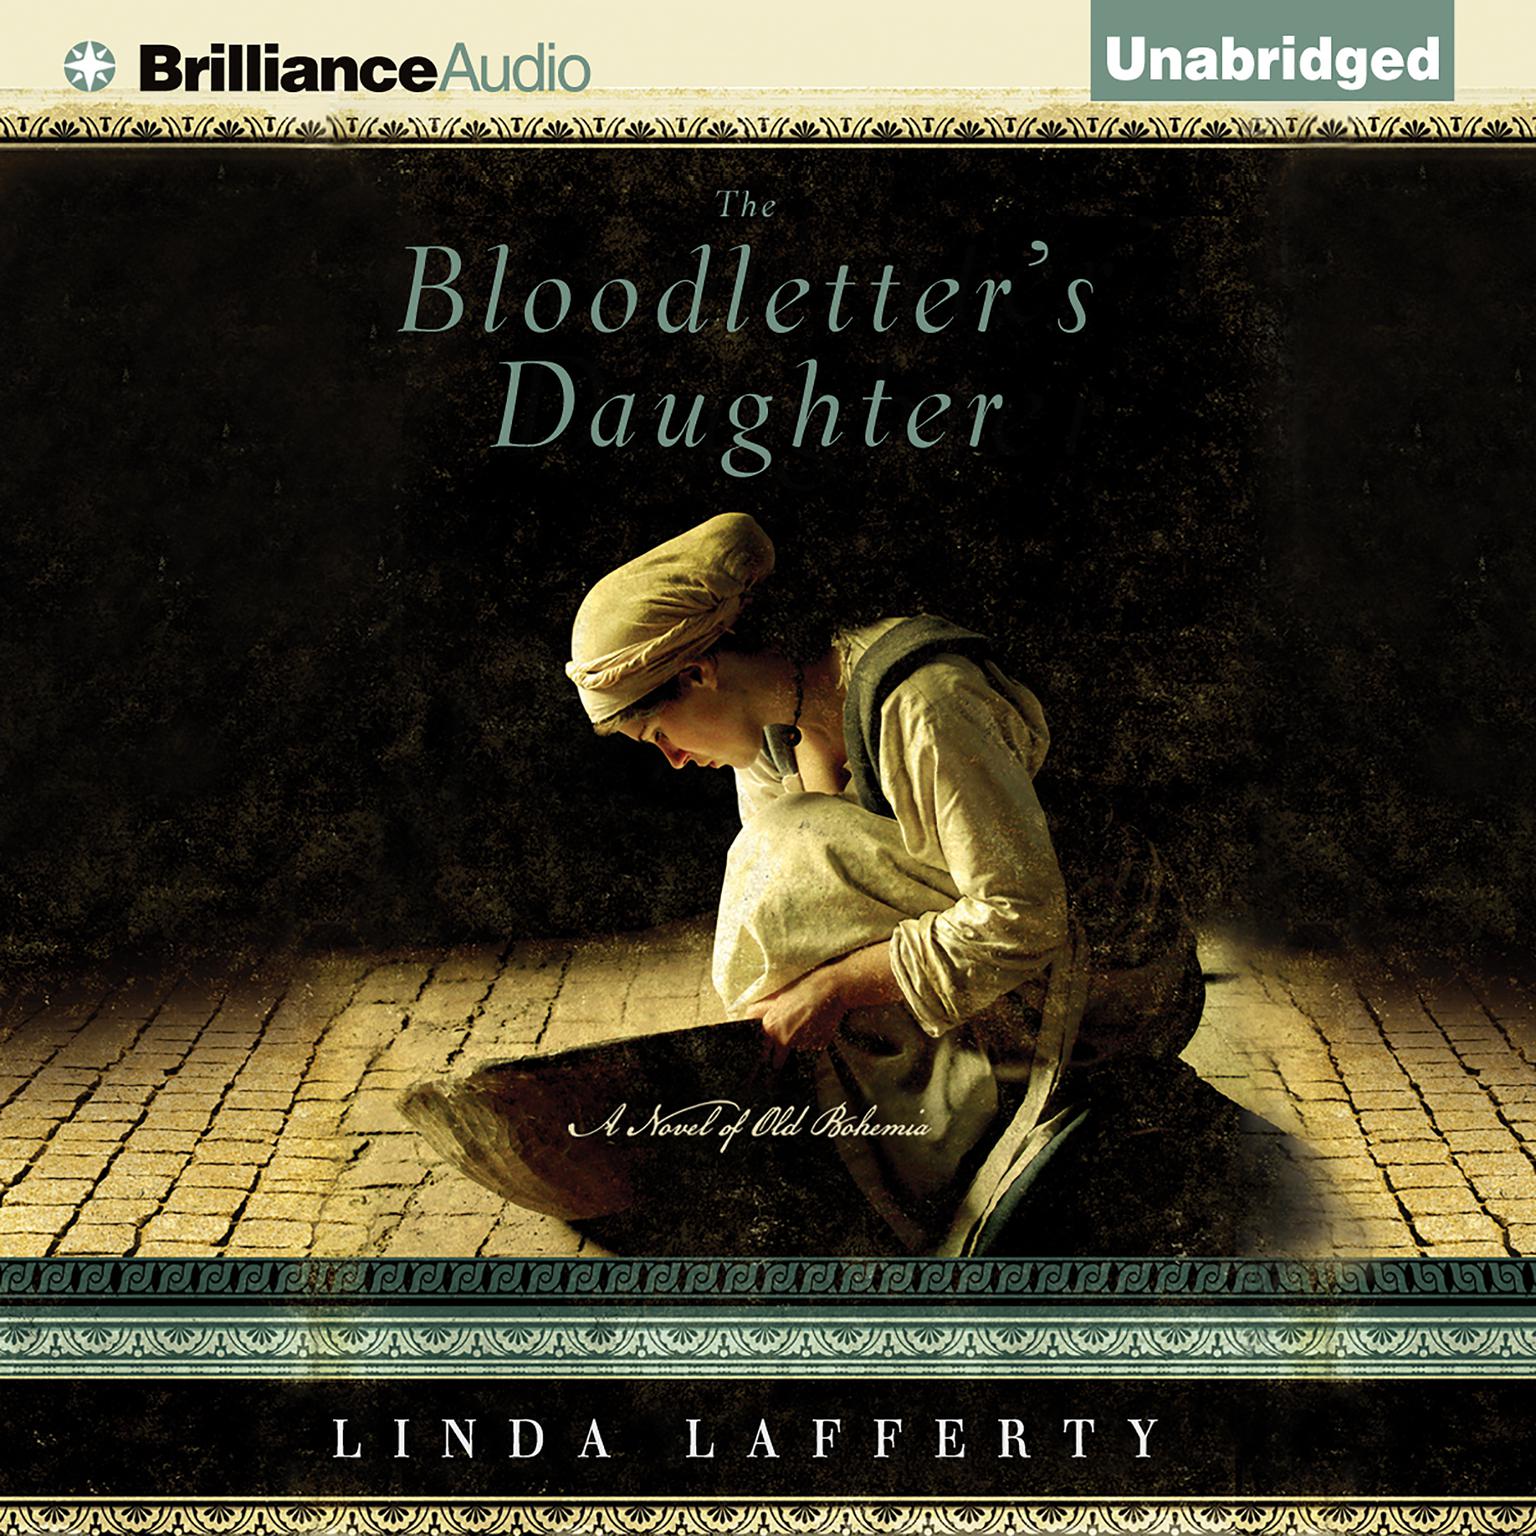 The Bloodletters Daughter: A Novel of Old Bohemia Audiobook, by Linda Lafferty